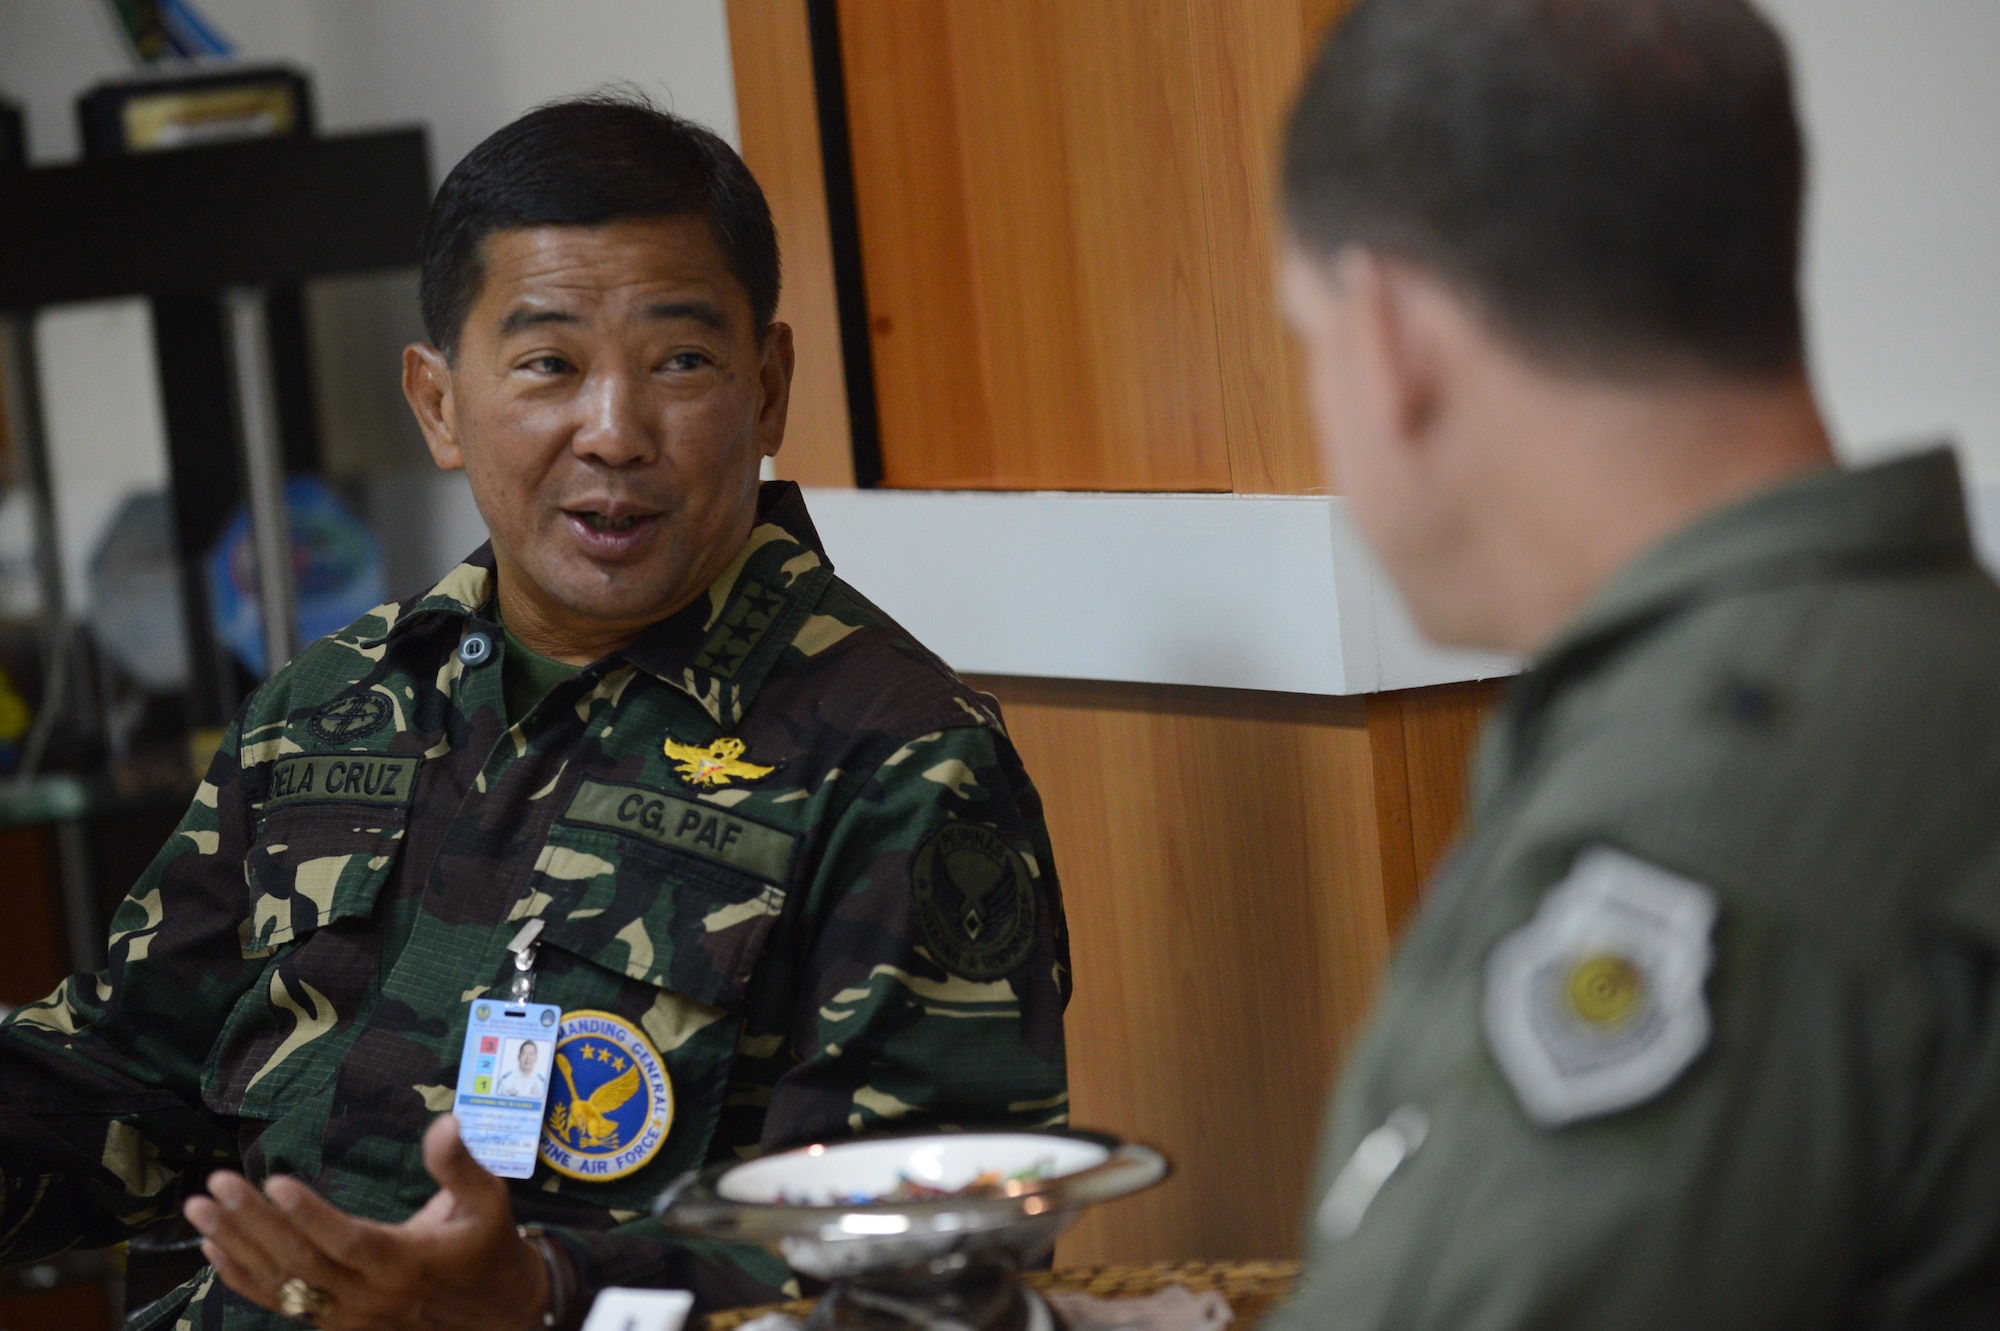 Brig. Gen. James Hecker, commander of Air Coordination Component Element, Joint Task Force 505, meets with Lt. Gen. Lauro Dela Cruz, the commanding general of the Philippine Air Force, at Villamor Air Base, Manila, Nov. 21, 2013. (U.S. Air Force photo by 2nd Lt. Jake Bailey/Released)